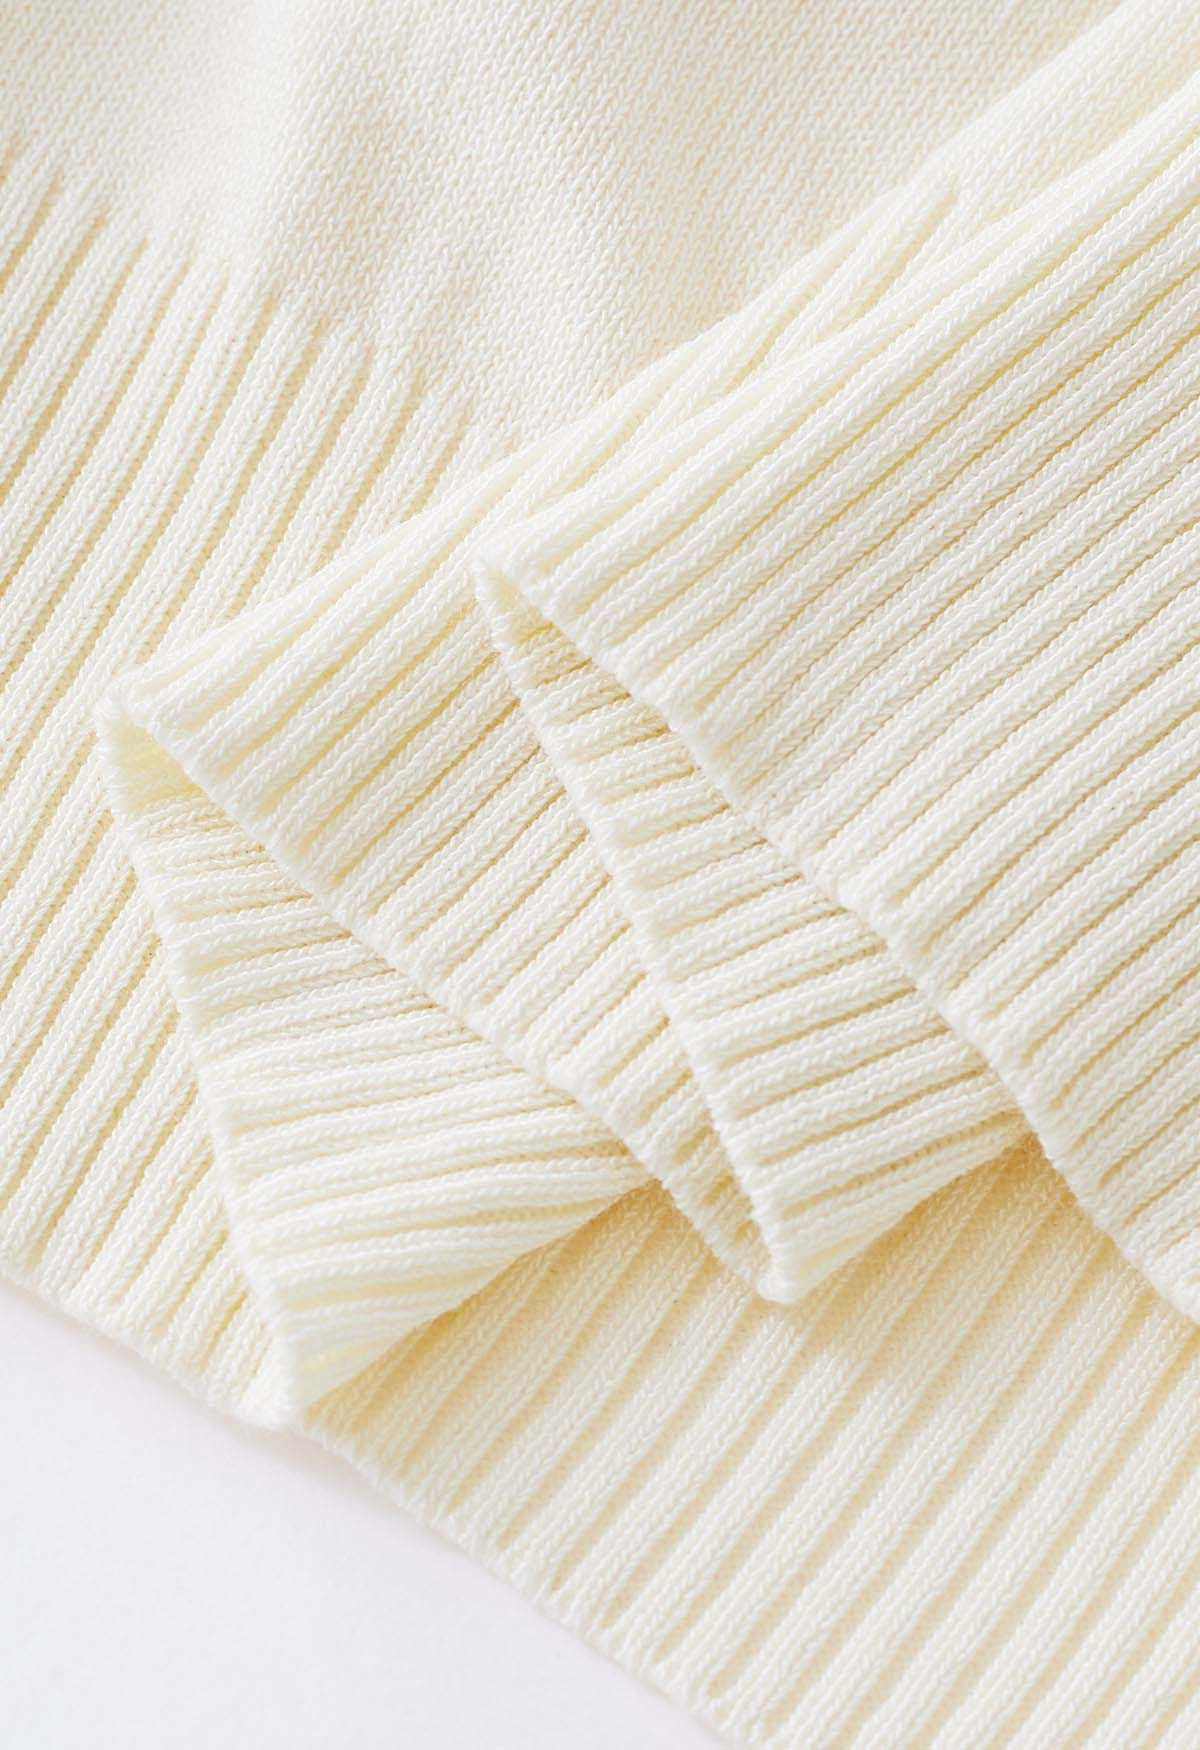 Strawberry Ribbed Knit Fabric